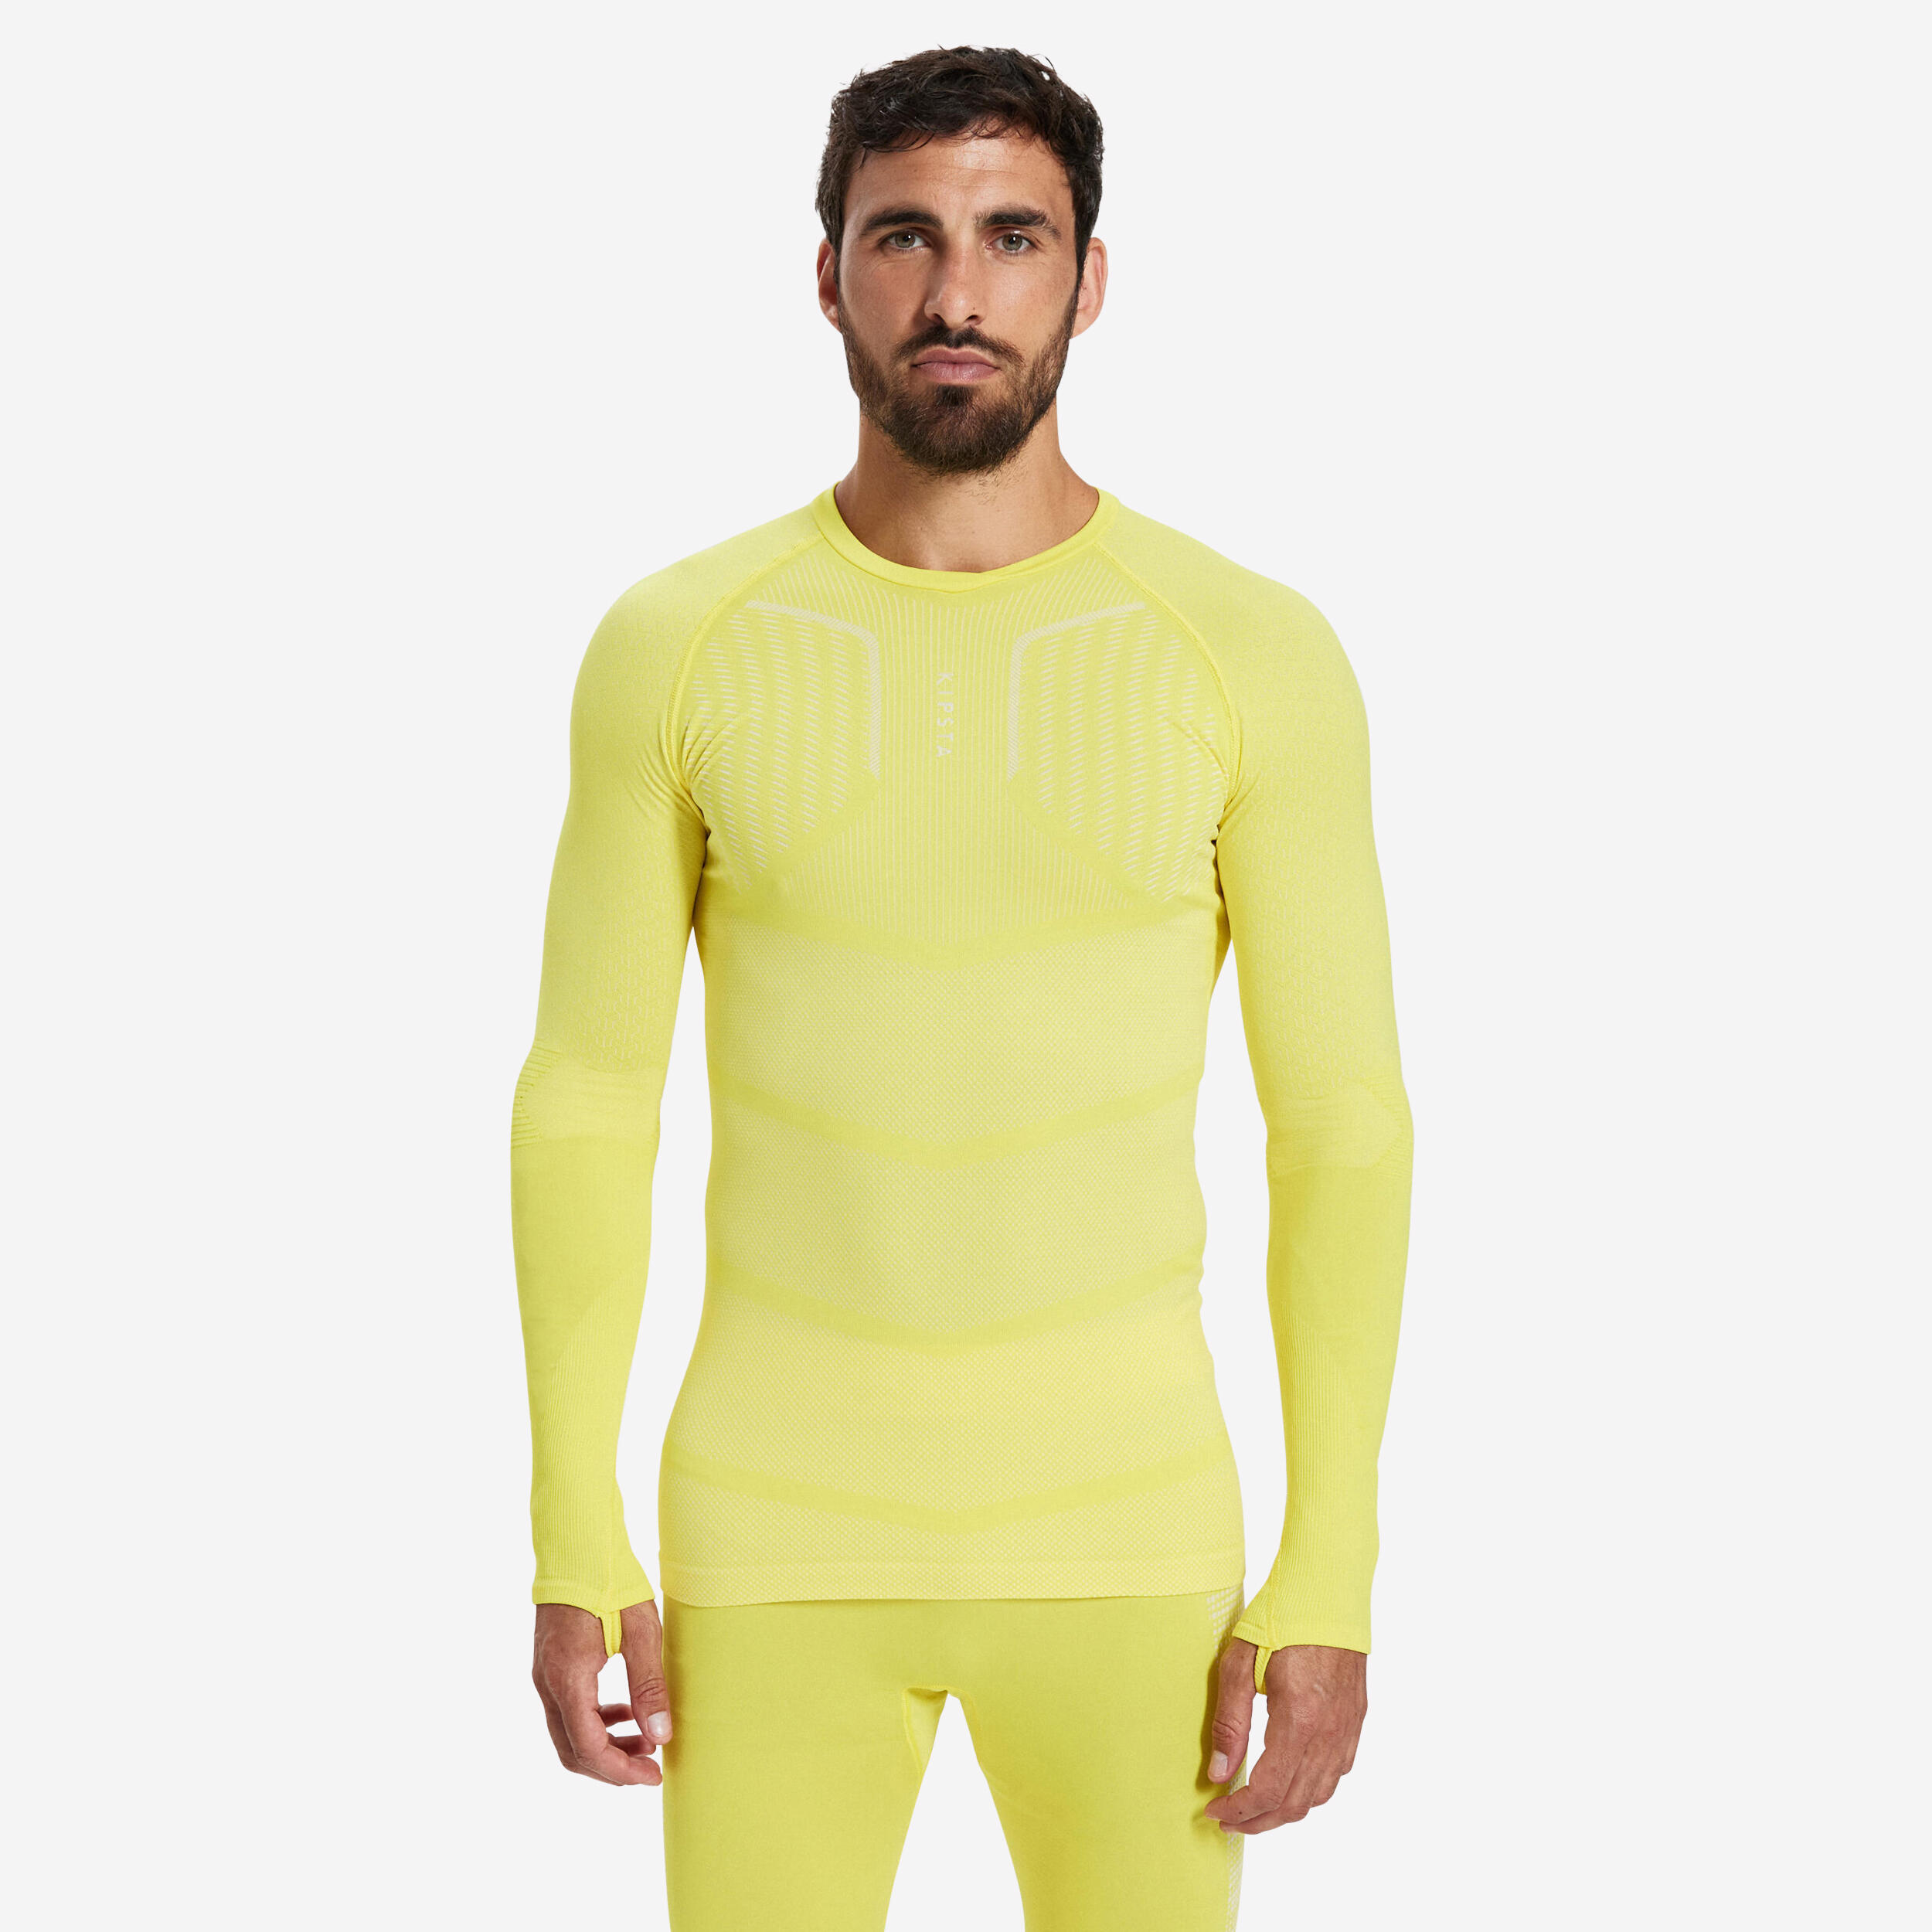 Adult Long-Sleeved Thermal Base Layer Top Keepdry 500 - Yellow 1/15